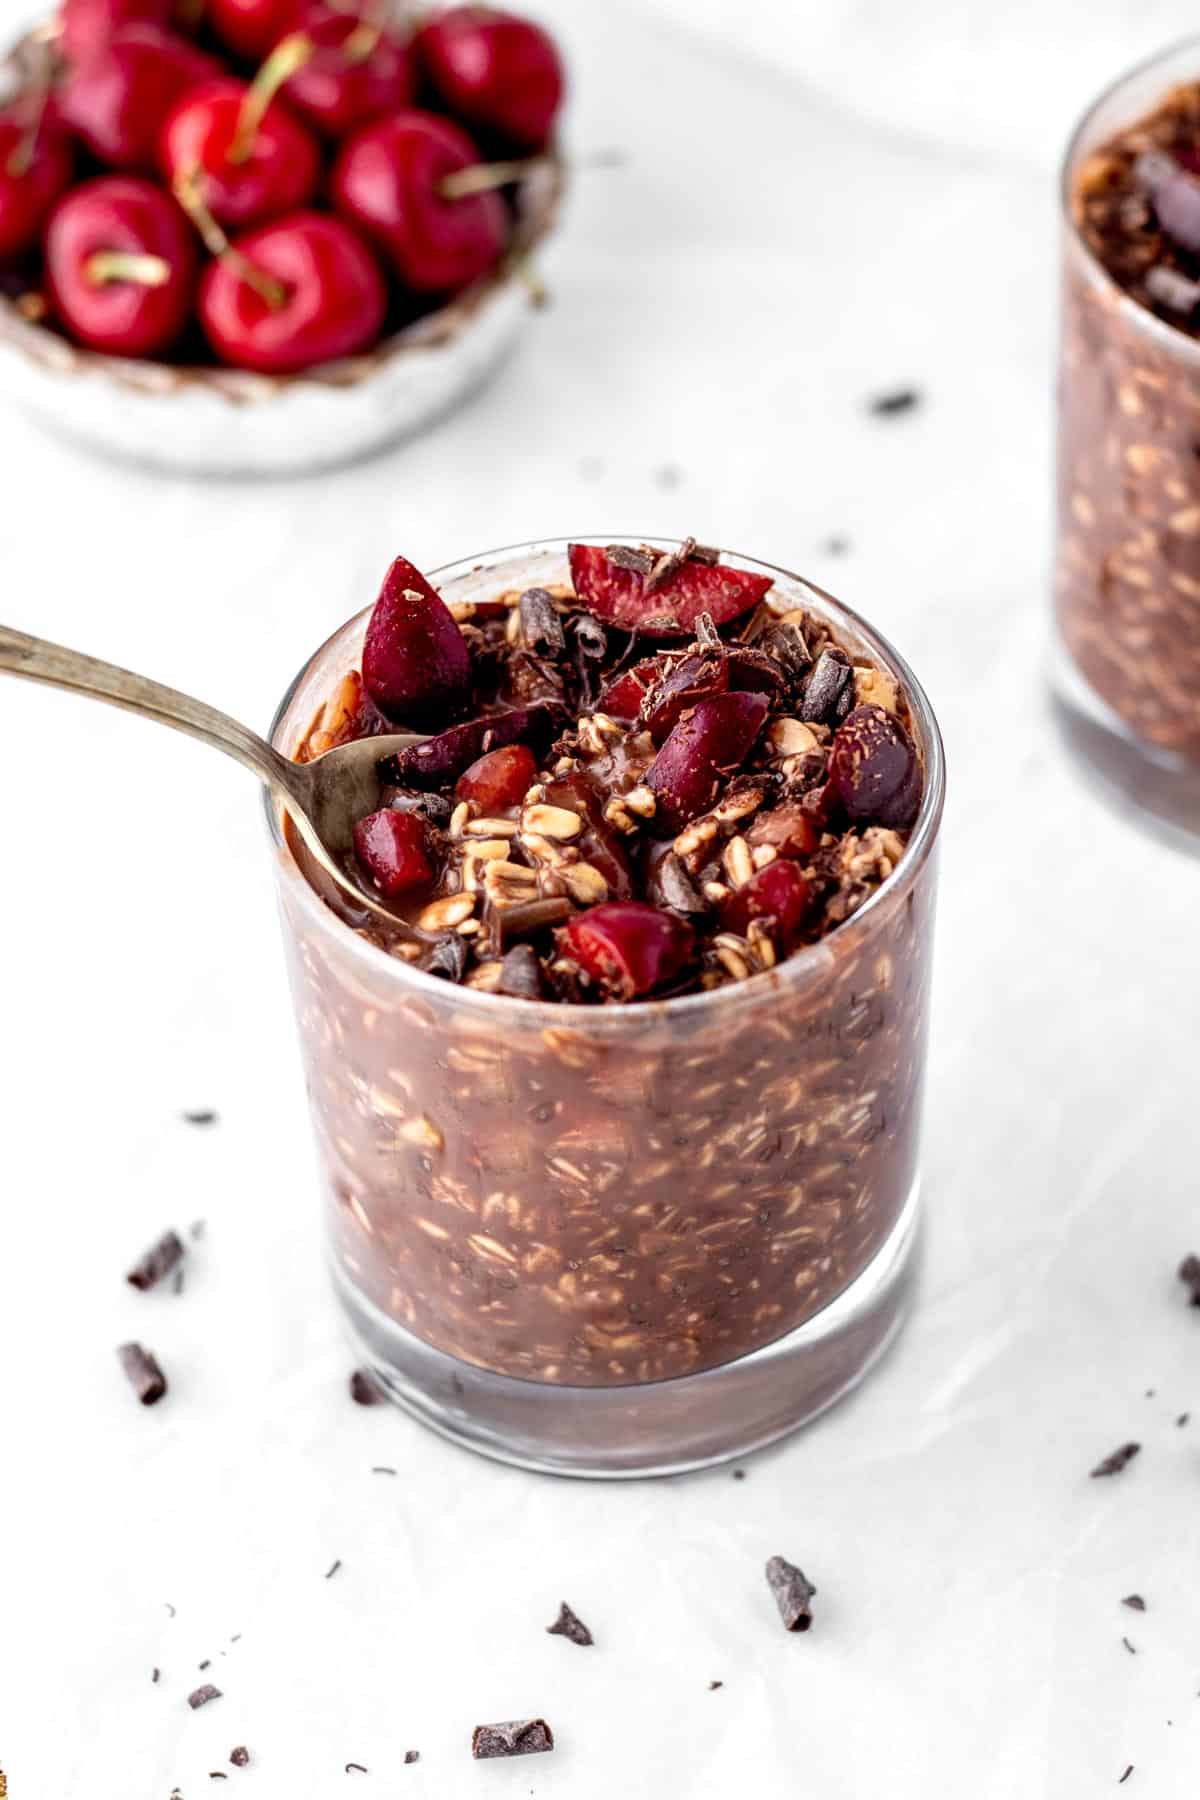 A spoon digging into a glass of chocolate cherry overnight oats.